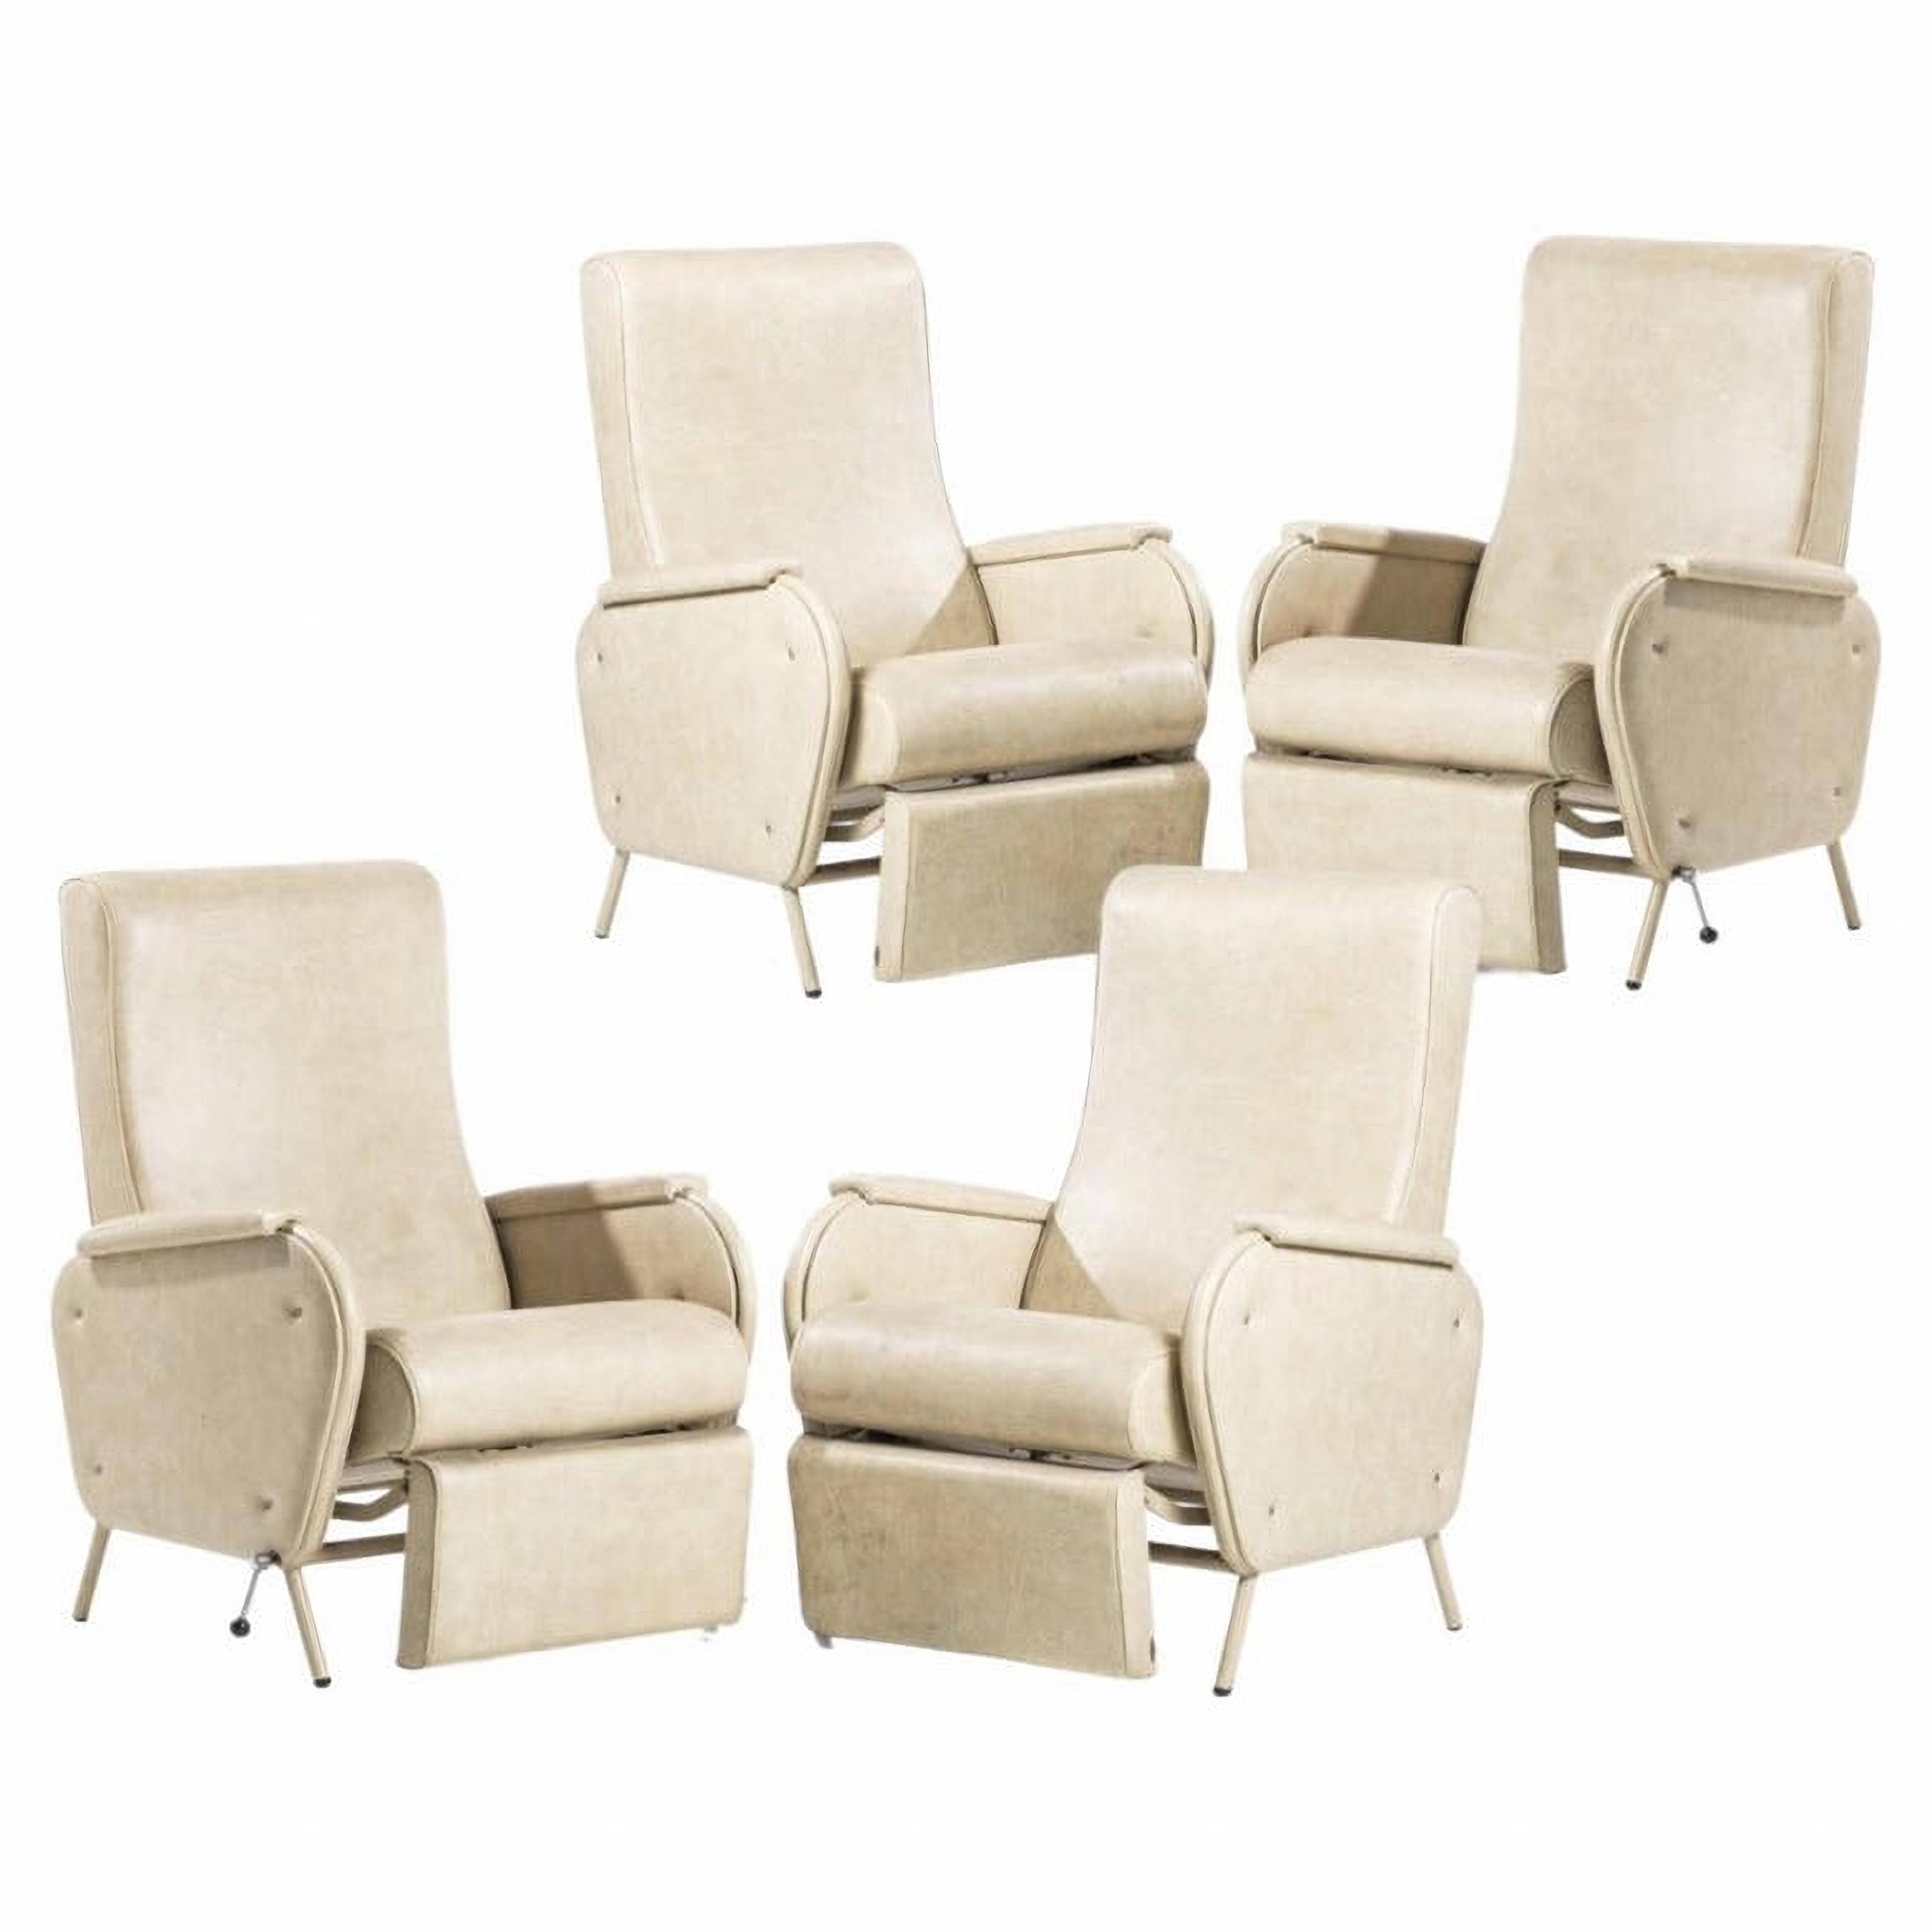 French Set of Four Art Deco Chairs, Early 20th Century For Sale 1